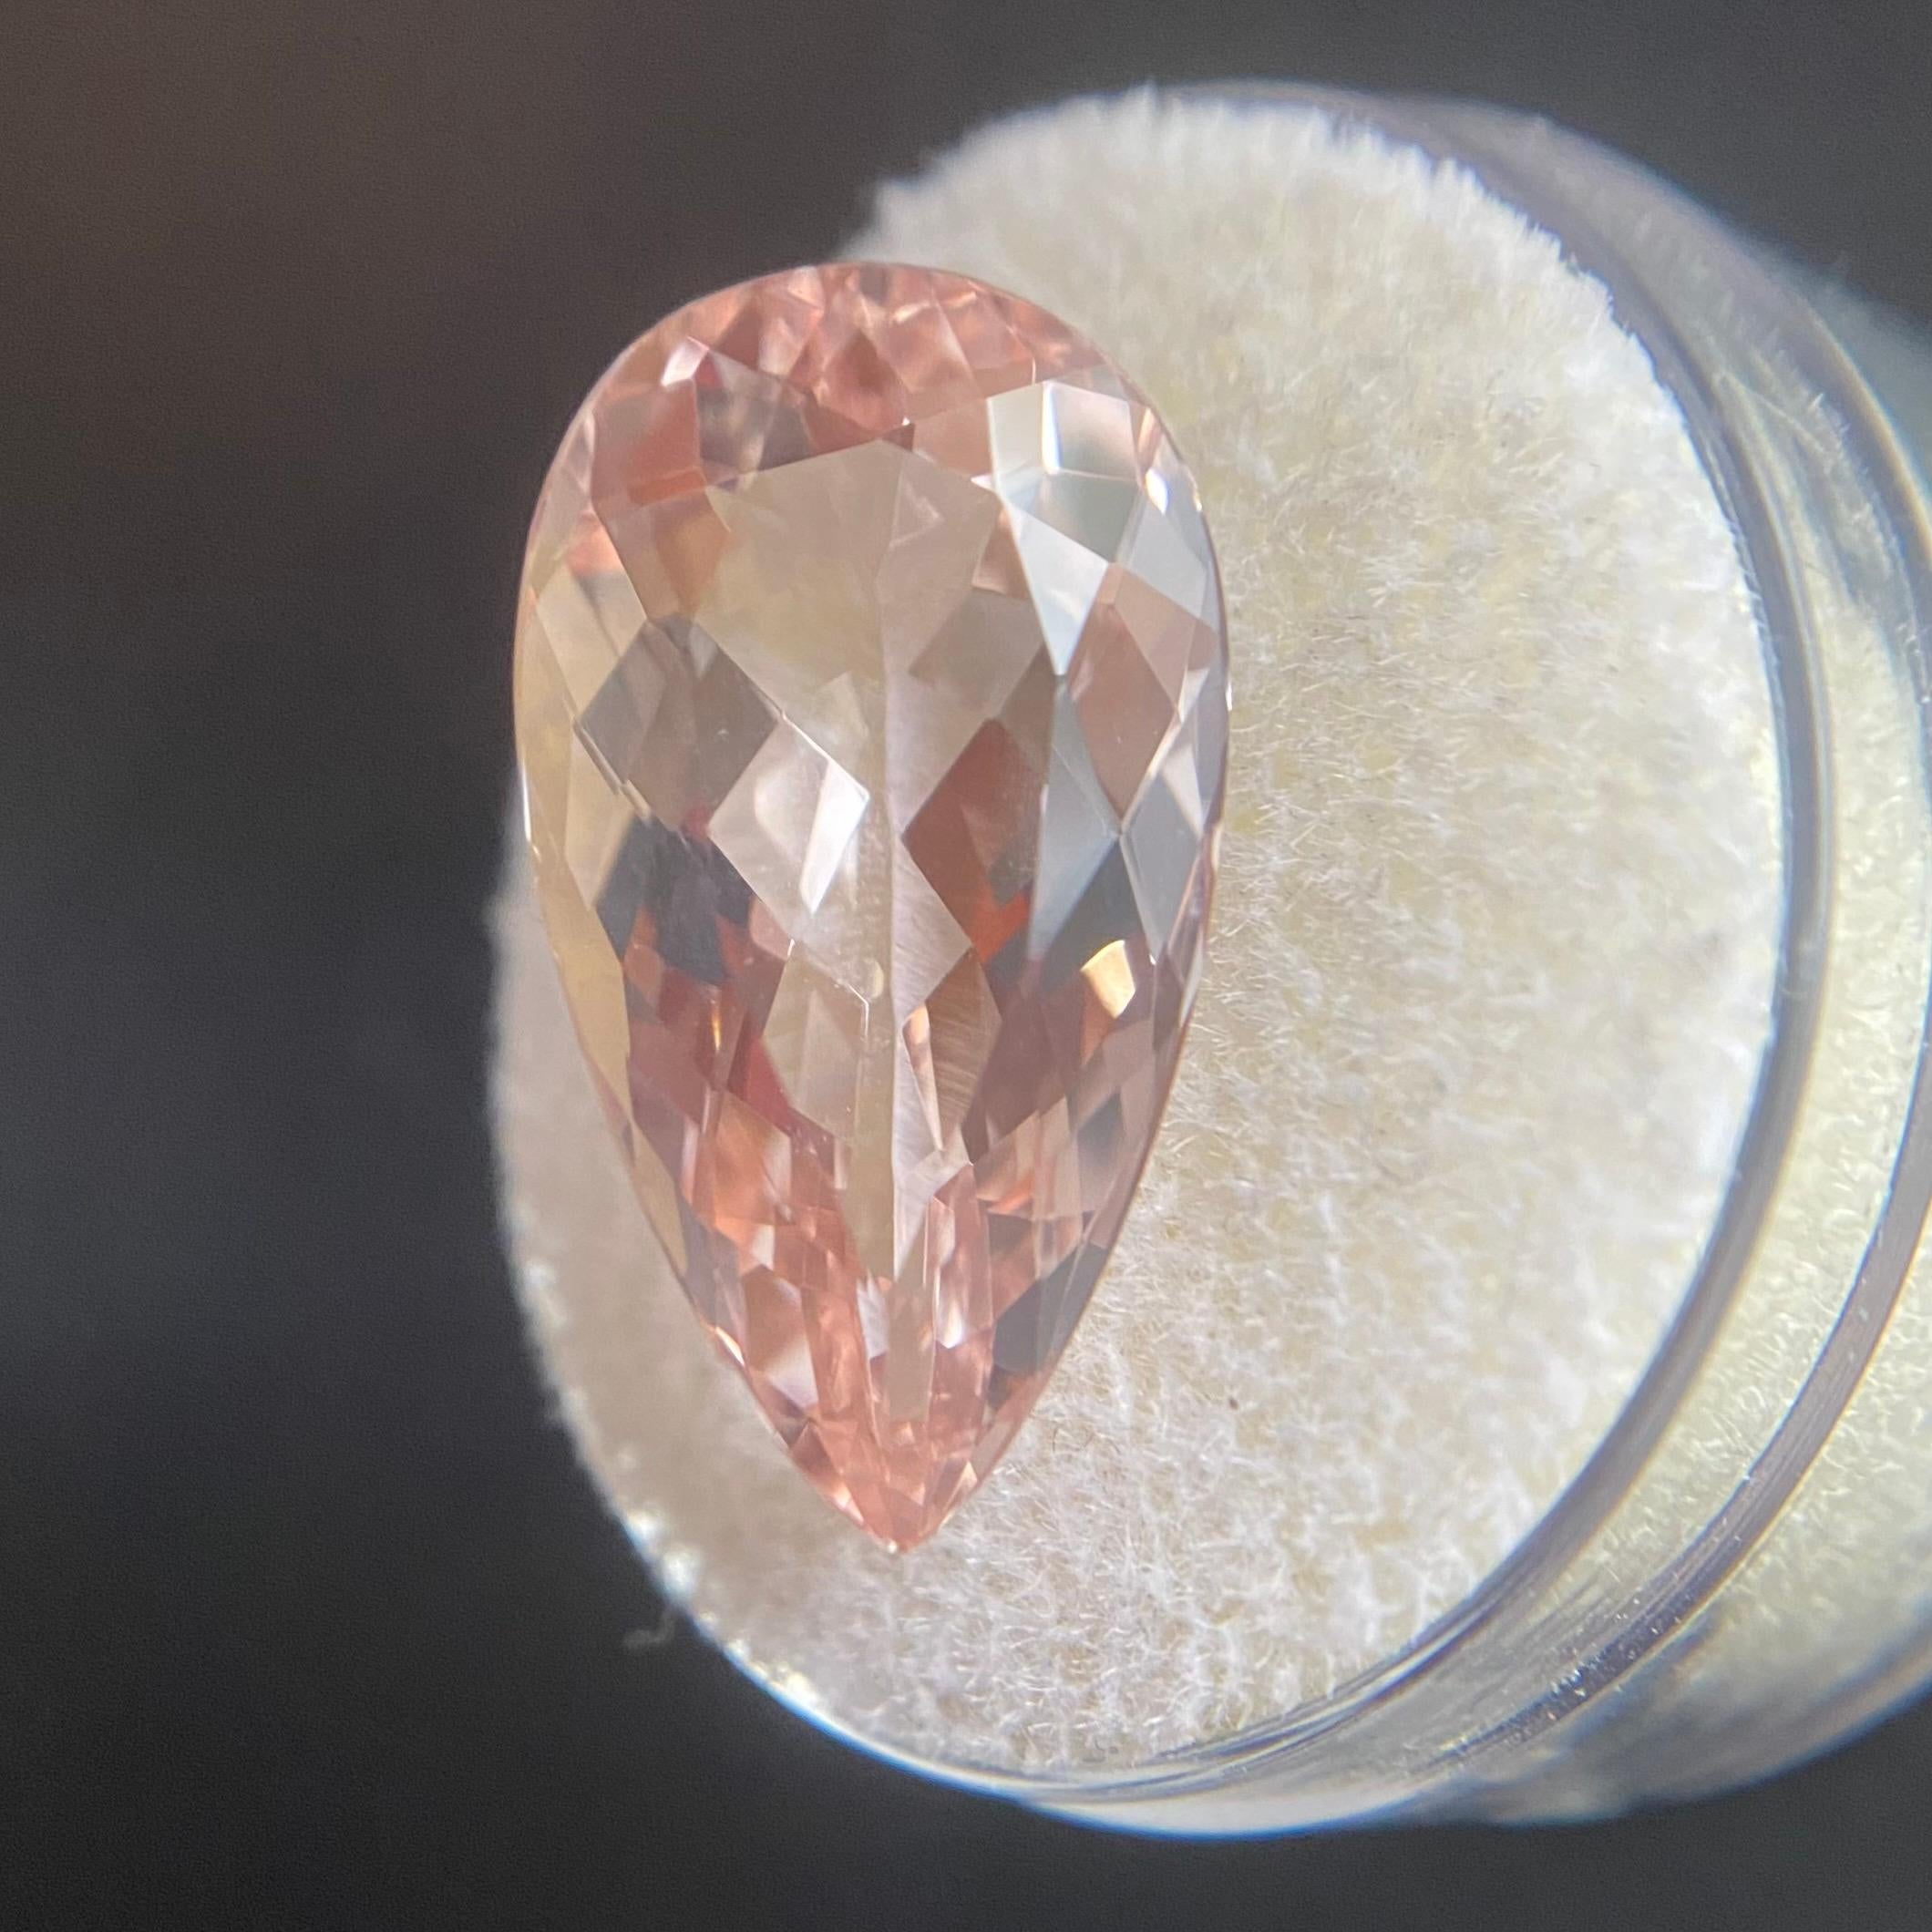 Fine Natural Morganite Gemstone. 

9.35 Carat with a beautiful pink orange (peach) colour and excellent clarity. Very clean stone.

Also has an excellent pear/teardrop cut with good proportions and symmetry with an ideal polish to show great shine